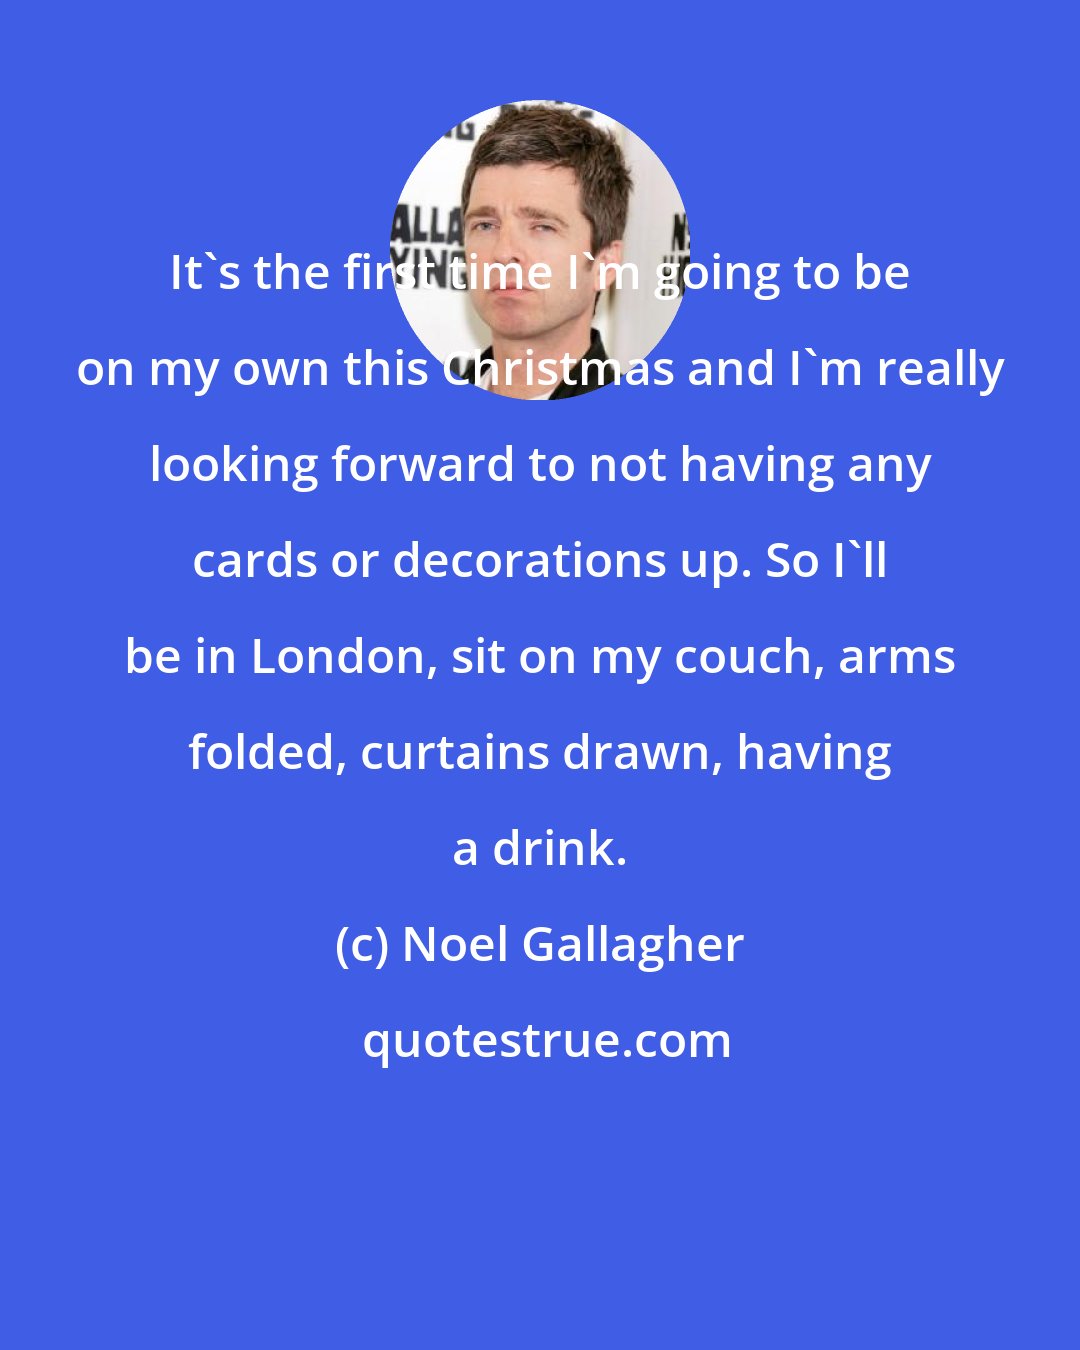 Noel Gallagher: It's the first time I'm going to be on my own this Christmas and I'm really looking forward to not having any cards or decorations up. So I'll be in London, sit on my couch, arms folded, curtains drawn, having a drink.